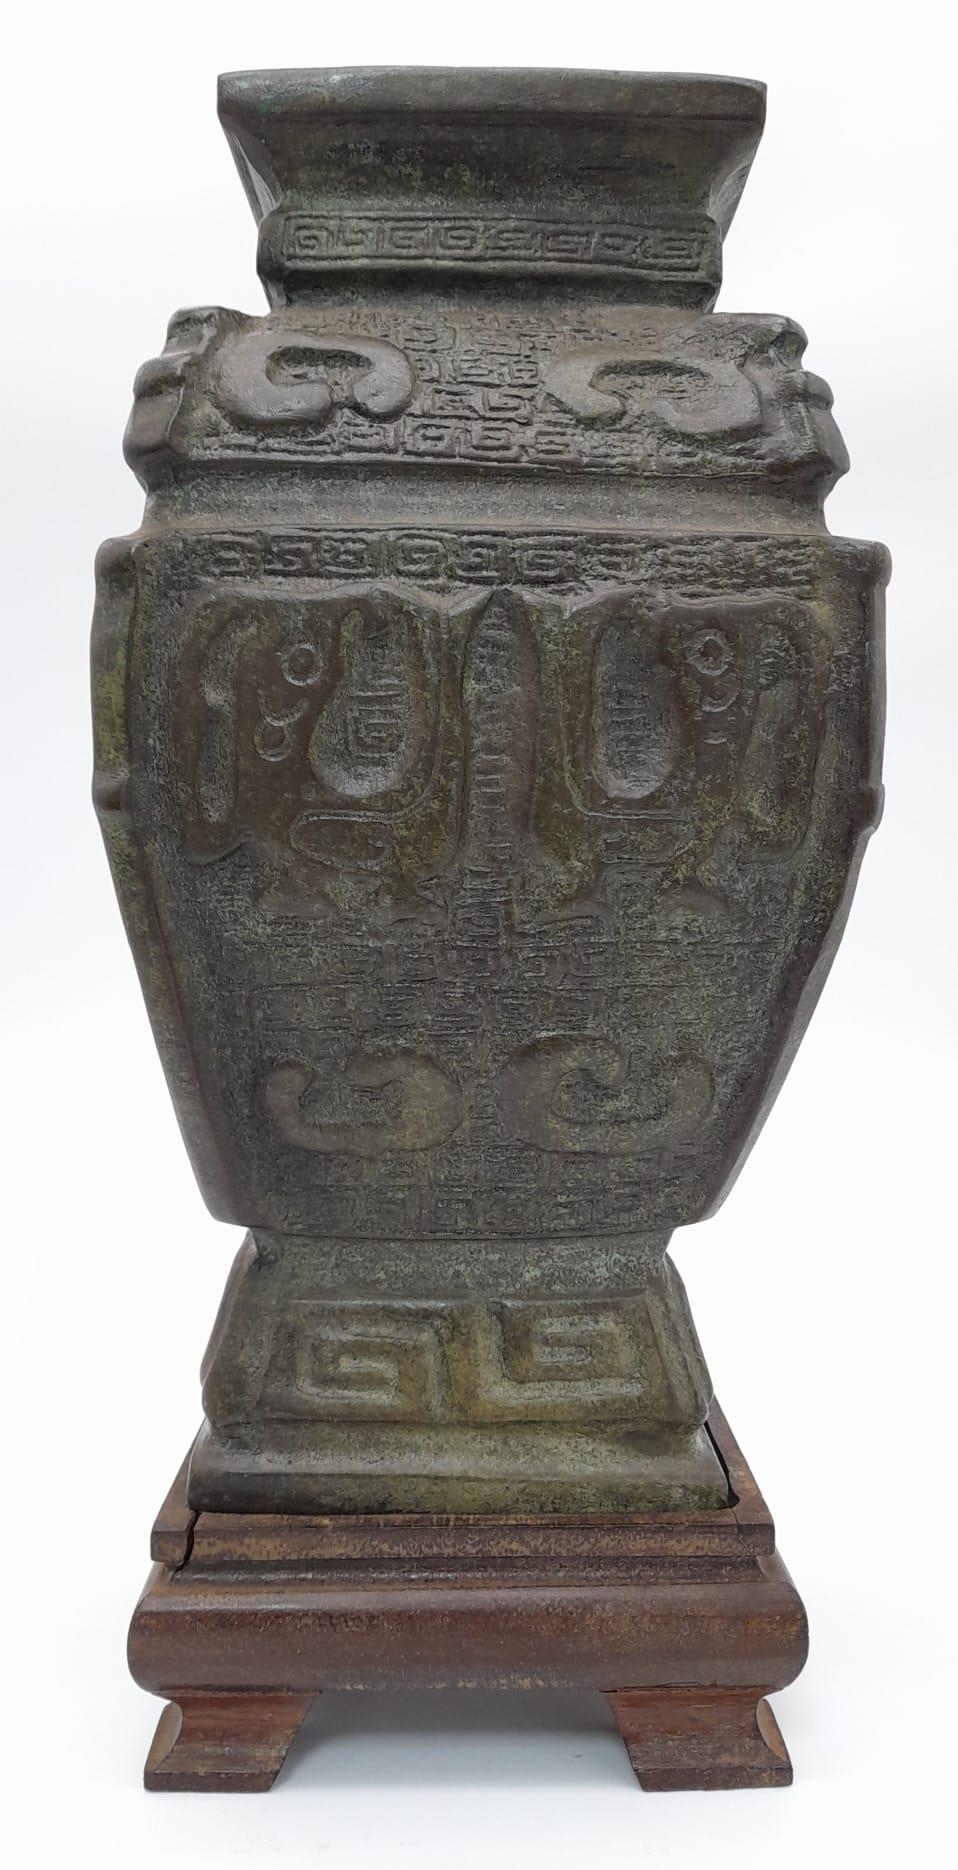 A Beautiful Qing Dynasty Bronze vase. Wonderful archaic detail with a well-aged patina. Comes on a